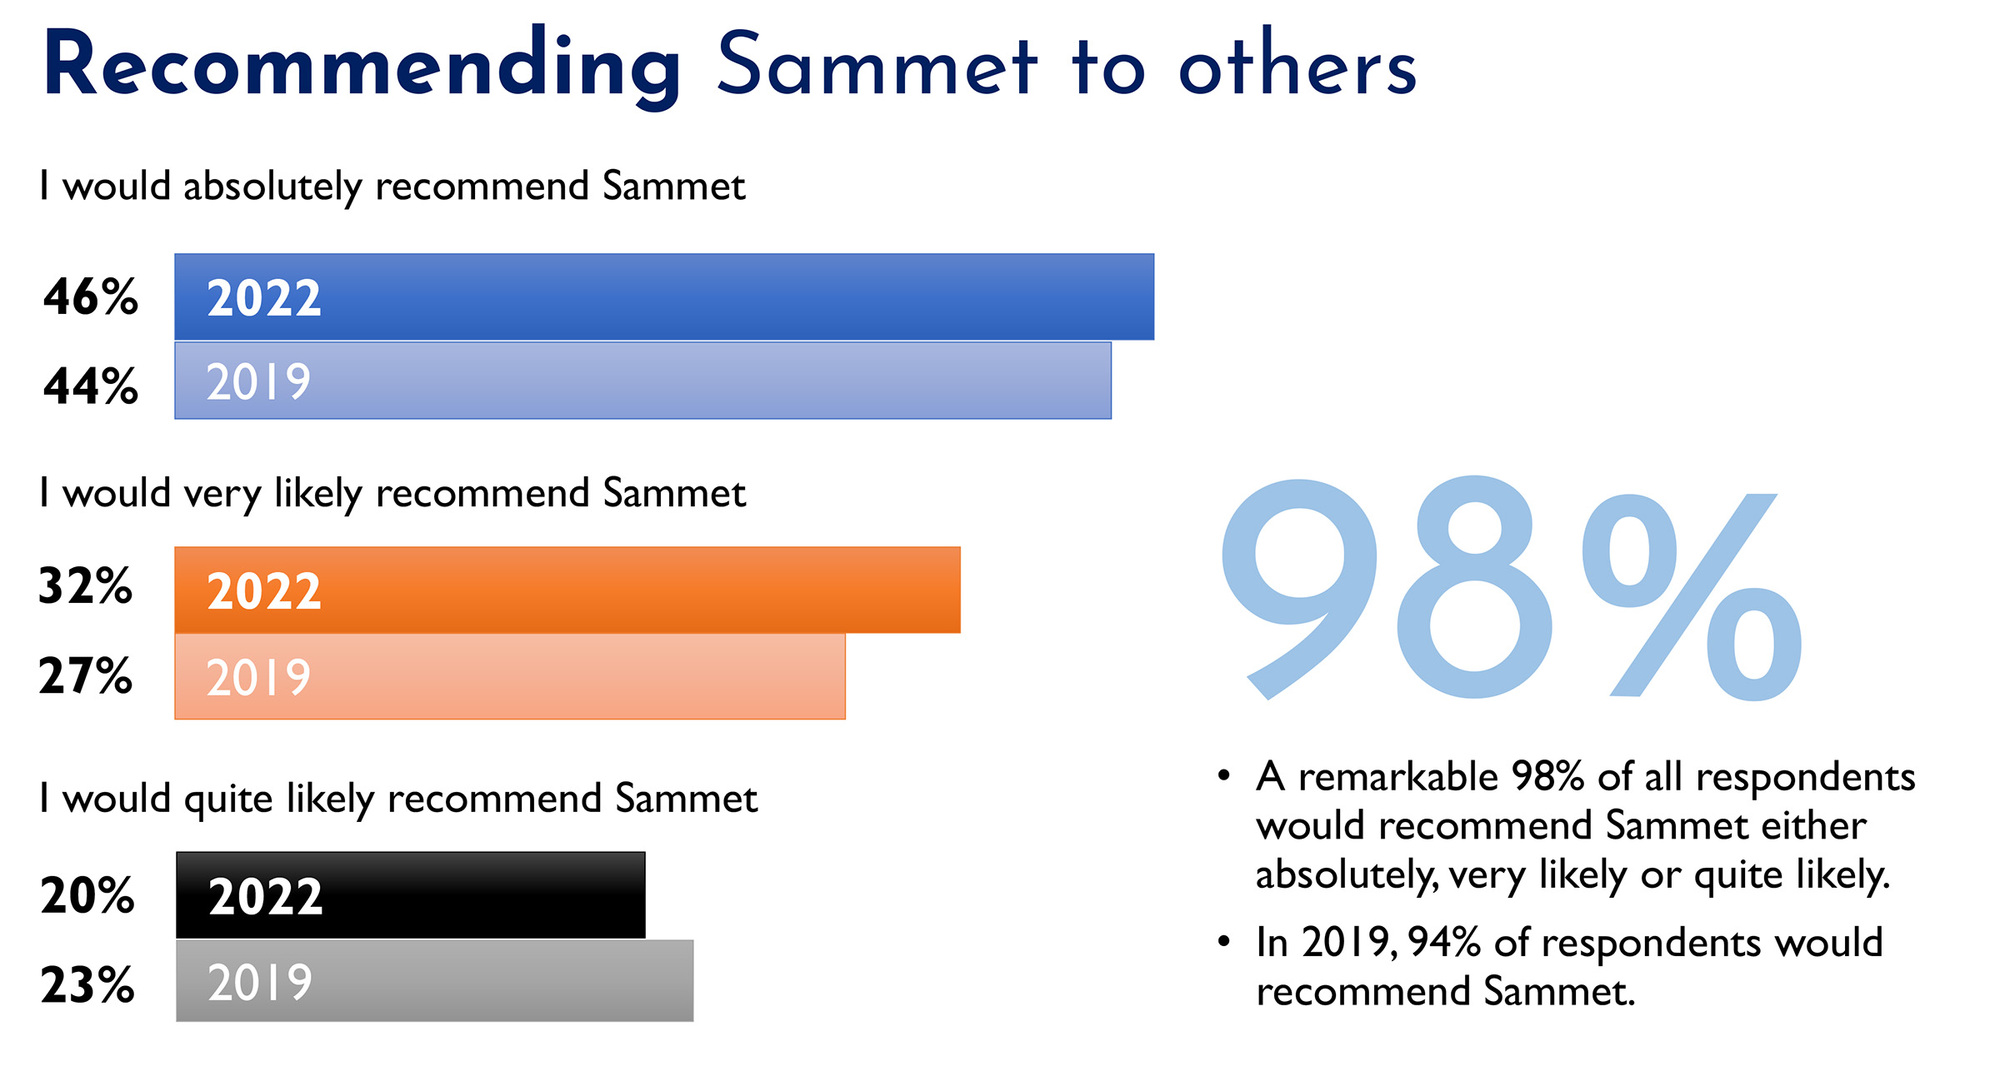 Recommending Sammet to others